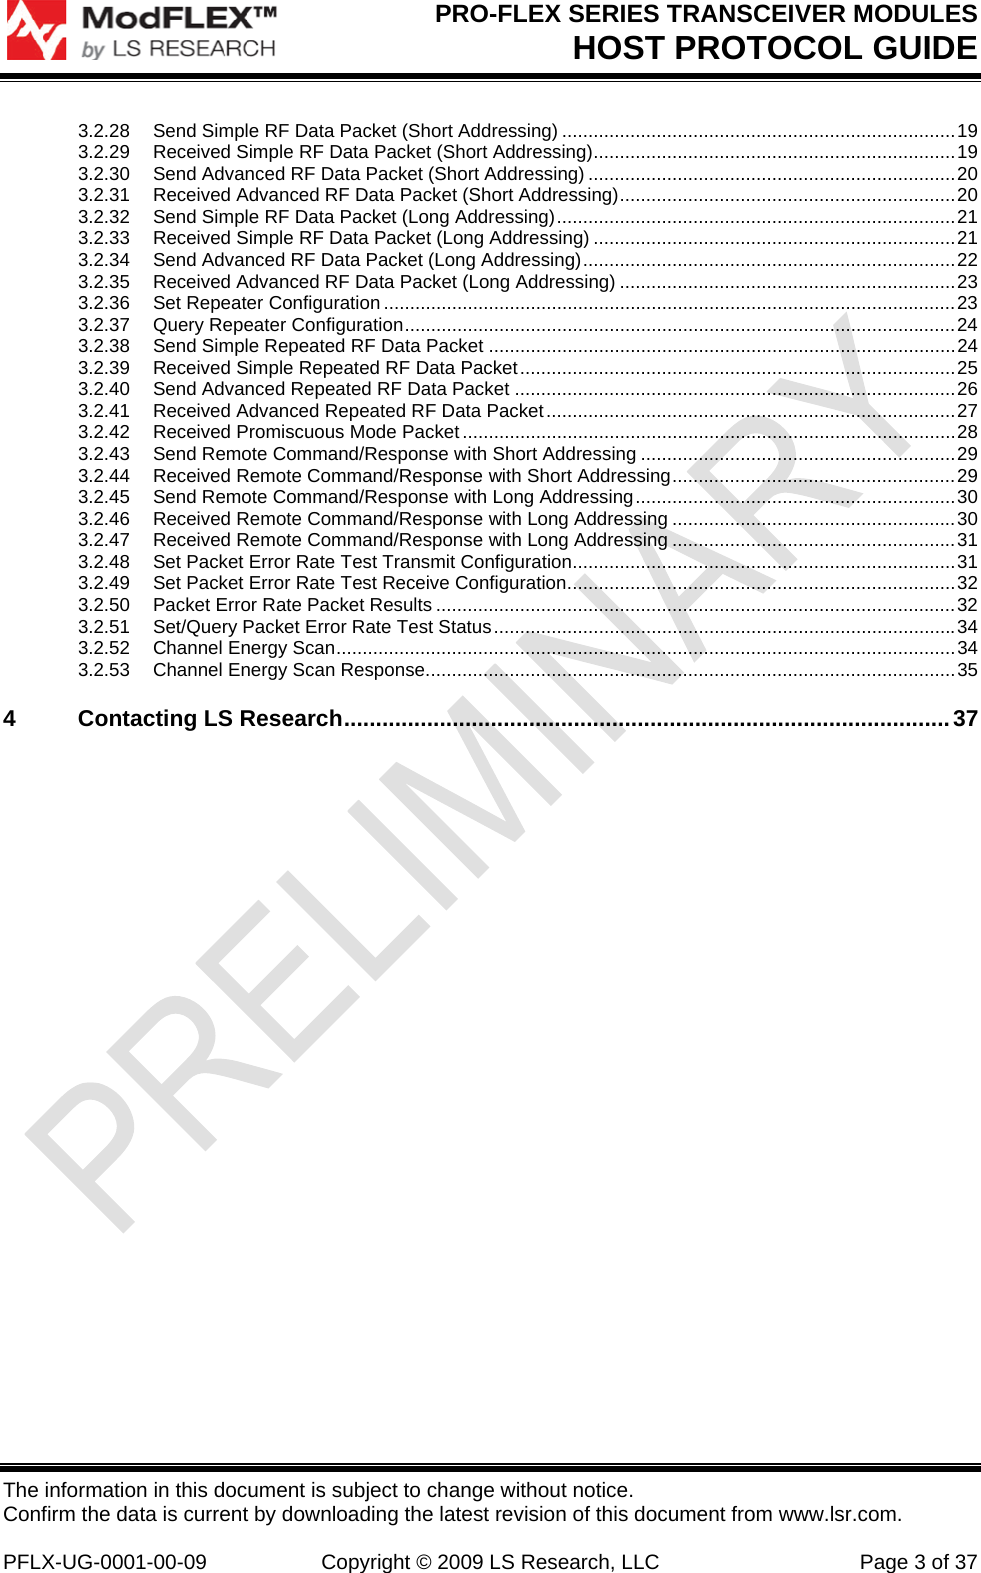 PRO-FLEX SERIES TRANSCEIVER MODULES HOST PROTOCOL GUIDE The information in this document is subject to change without notice. Confirm the data is current by downloading the latest revision of this document from www.lsr.com.  PFLX-UG-0001-00-09  Copyright © 2009 LS Research, LLC  Page 3 of 37 3.2.28Send Simple RF Data Packet (Short Addressing) ........................................................................... 193.2.29Received Simple RF Data Packet (Short Addressing) ..................................................................... 193.2.30Send Advanced RF Data Packet (Short Addressing) ...................................................................... 203.2.31Received Advanced RF Data Packet (Short Addressing) ................................................................ 203.2.32Send Simple RF Data Packet (Long Addressing) ............................................................................ 213.2.33Received Simple RF Data Packet (Long Addressing) ..................................................................... 213.2.34Send Advanced RF Data Packet (Long Addressing) ....................................................................... 223.2.35Received Advanced RF Data Packet (Long Addressing) ................................................................ 233.2.36Set Repeater Configuration ............................................................................................................. 233.2.37Query Repeater Configuration ......................................................................................................... 243.2.38Send Simple Repeated RF Data Packet ......................................................................................... 243.2.39Received Simple Repeated RF Data Packet ................................................................................... 253.2.40Send Advanced Repeated RF Data Packet .................................................................................... 263.2.41Received Advanced Repeated RF Data Packet .............................................................................. 273.2.42Received Promiscuous Mode Packet .............................................................................................. 283.2.43Send Remote Command/Response with Short Addressing ............................................................ 293.2.44Received Remote Command/Response with Short Addressing ......................................................  293.2.45Send Remote Command/Response with Long Addressing ............................................................. 303.2.46Received Remote Command/Response with Long Addressing ...................................................... 303.2.47Received Remote Command/Response with Long Addressing ...................................................... 313.2.48Set Packet Error Rate Test Transmit Configuration ......................................................................... 313.2.49Set Packet Error Rate Test Receive Configuration .......................................................................... 323.2.50Packet Error Rate Packet Results ................................................................................................... 323.2.51Set/Query Packet Error Rate Test Status ........................................................................................ 343.2.52Channel Energy Scan ...................................................................................................................... 343.2.53Channel Energy Scan Response ..................................................................................................... 354Contacting LS Research ............................................................................................... 37 